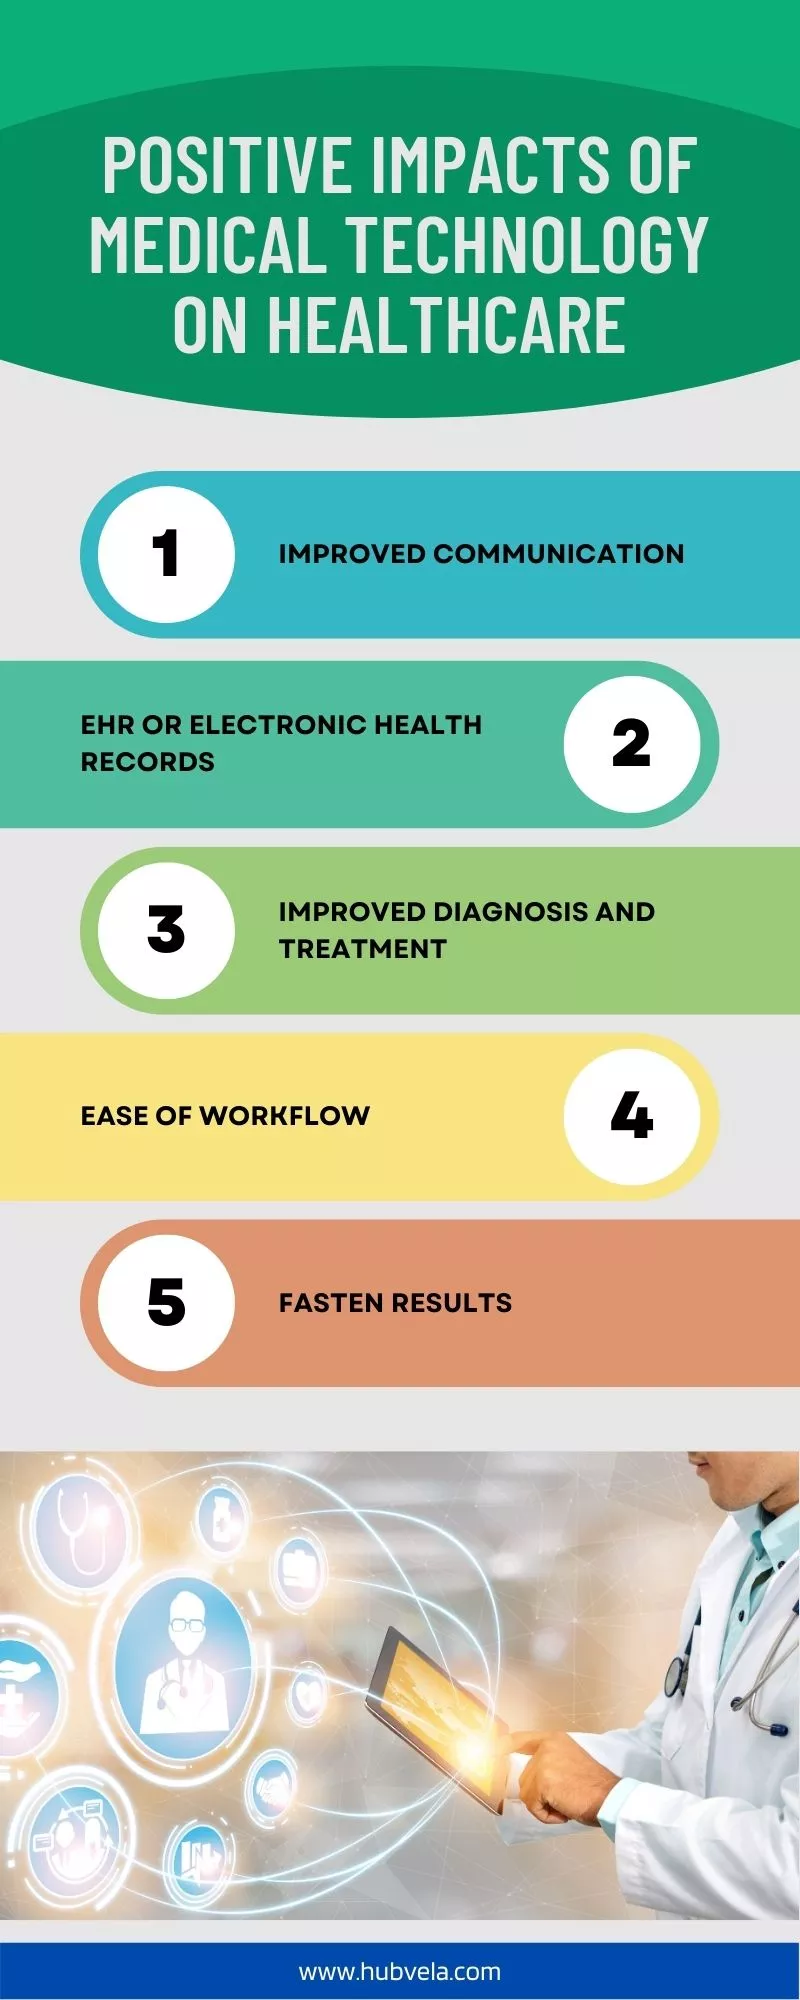 Positive Impacts of Medical Technology on Healthcare infographic